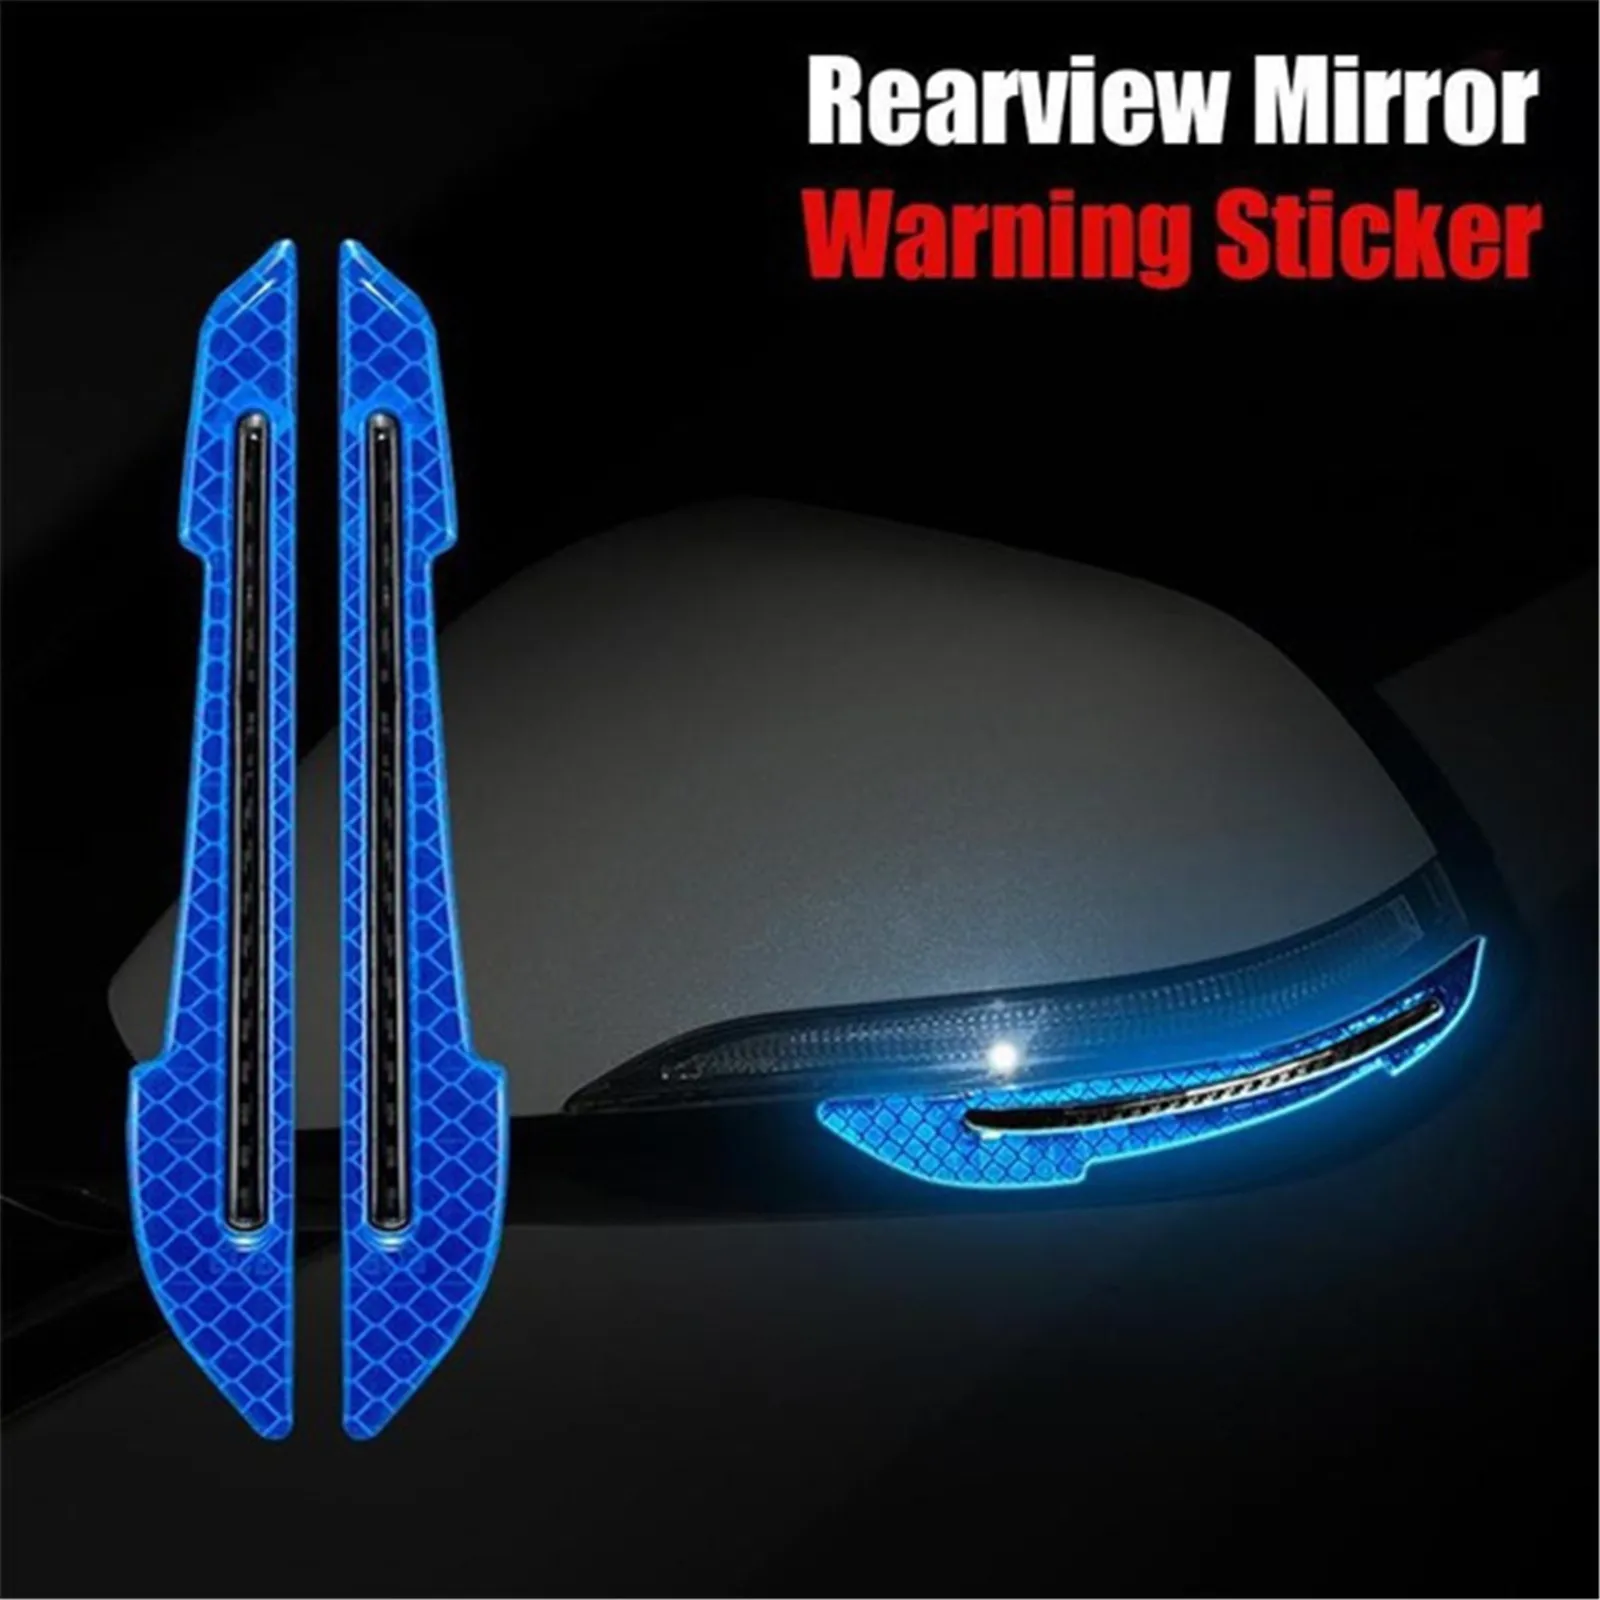 2Pcs Reflective Car Stickers Rearview Mirror Protection Stickers Collision Protection Strips Universal Auto Exterior Accessories funny bumper stickers